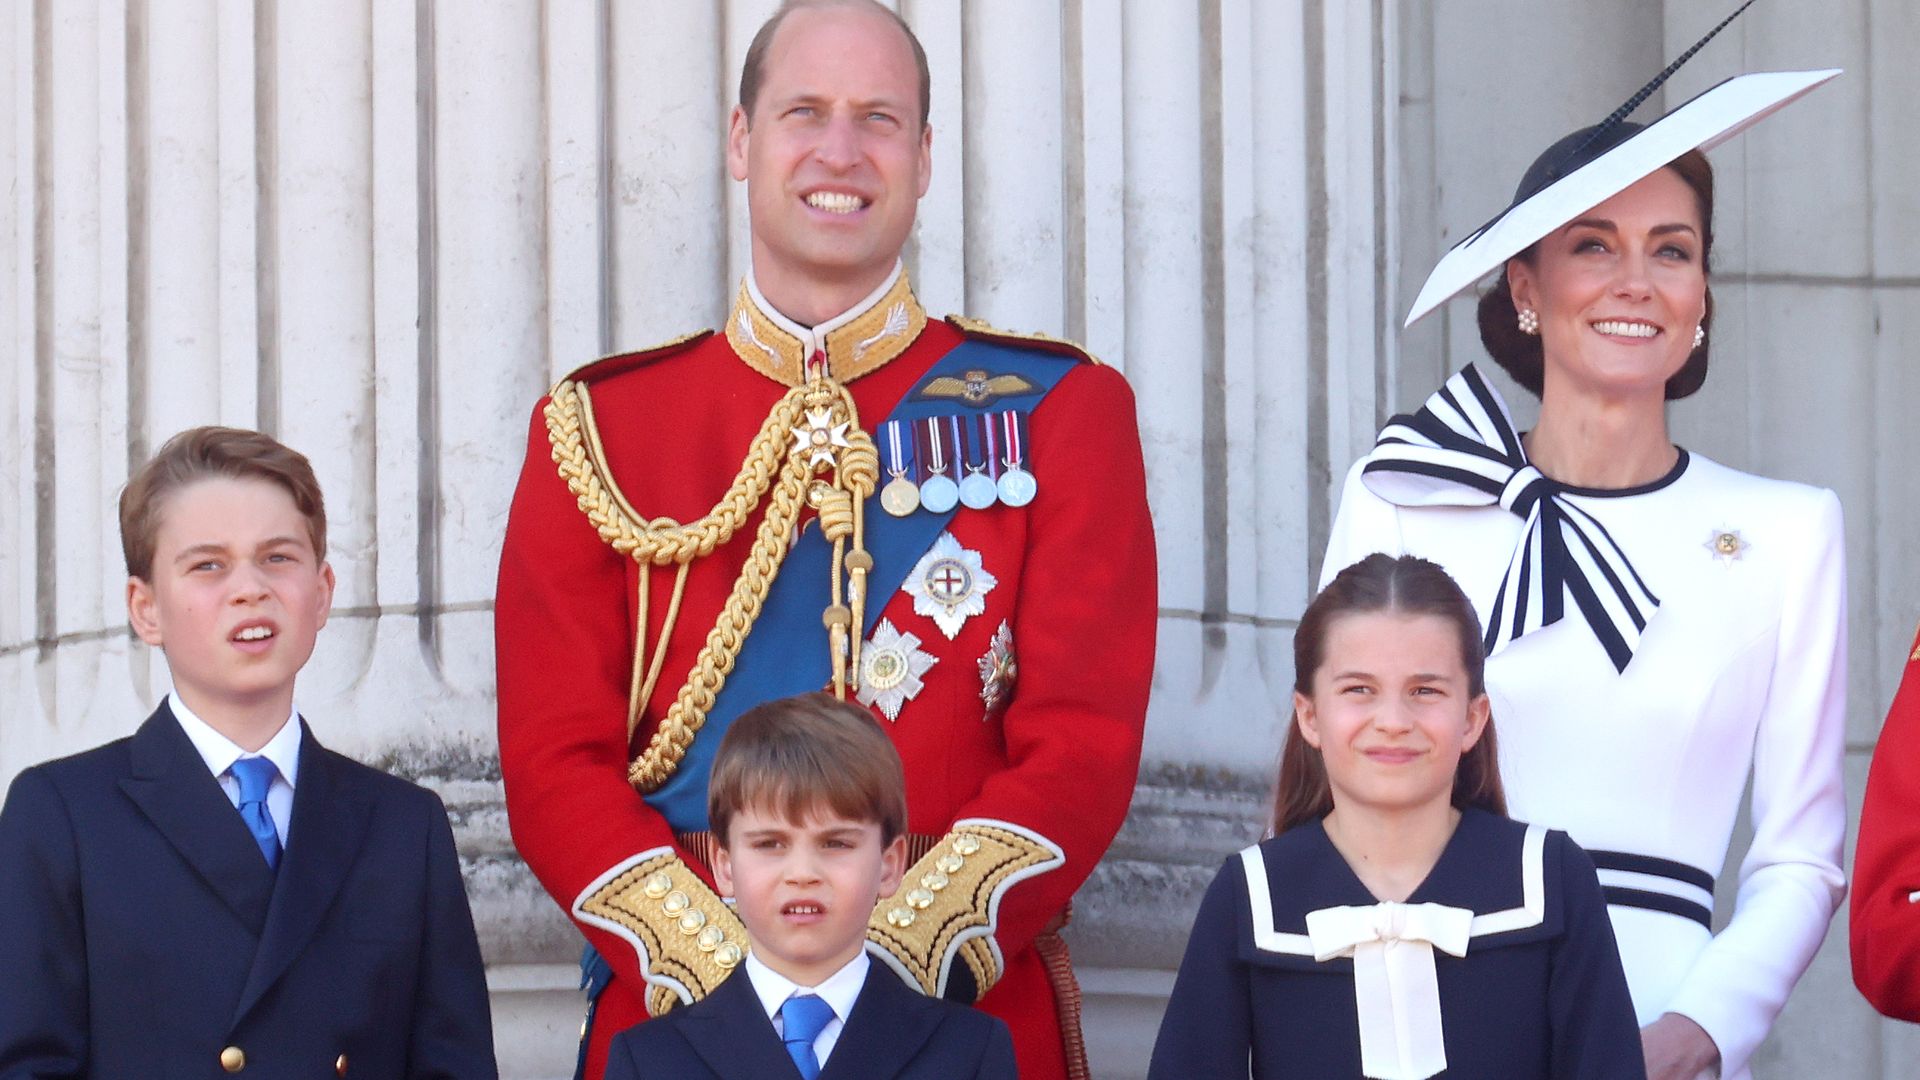 LONDON, ENGLAND - JUNE 15: (L-R) Prince George of Wales, Prince William, Prince of Wales, Prince Louis of Wales, Catherine, Princess of Wales, Princess Charlotte of Wales and King Charles III on the balcony during Trooping the Colour at Buckingham Palace on June 15, 2024 in London, England. Trooping the Colour is a ceremonial parade celebrating the official birthday of the British Monarch. The event features over 1,400 soldiers and officers, accompanied by 200 horses. More than 400 musicians from ten different bands and Corps of Drums march and perform in perfect harmony. (Photo by Chris Jackson/Getty Images)